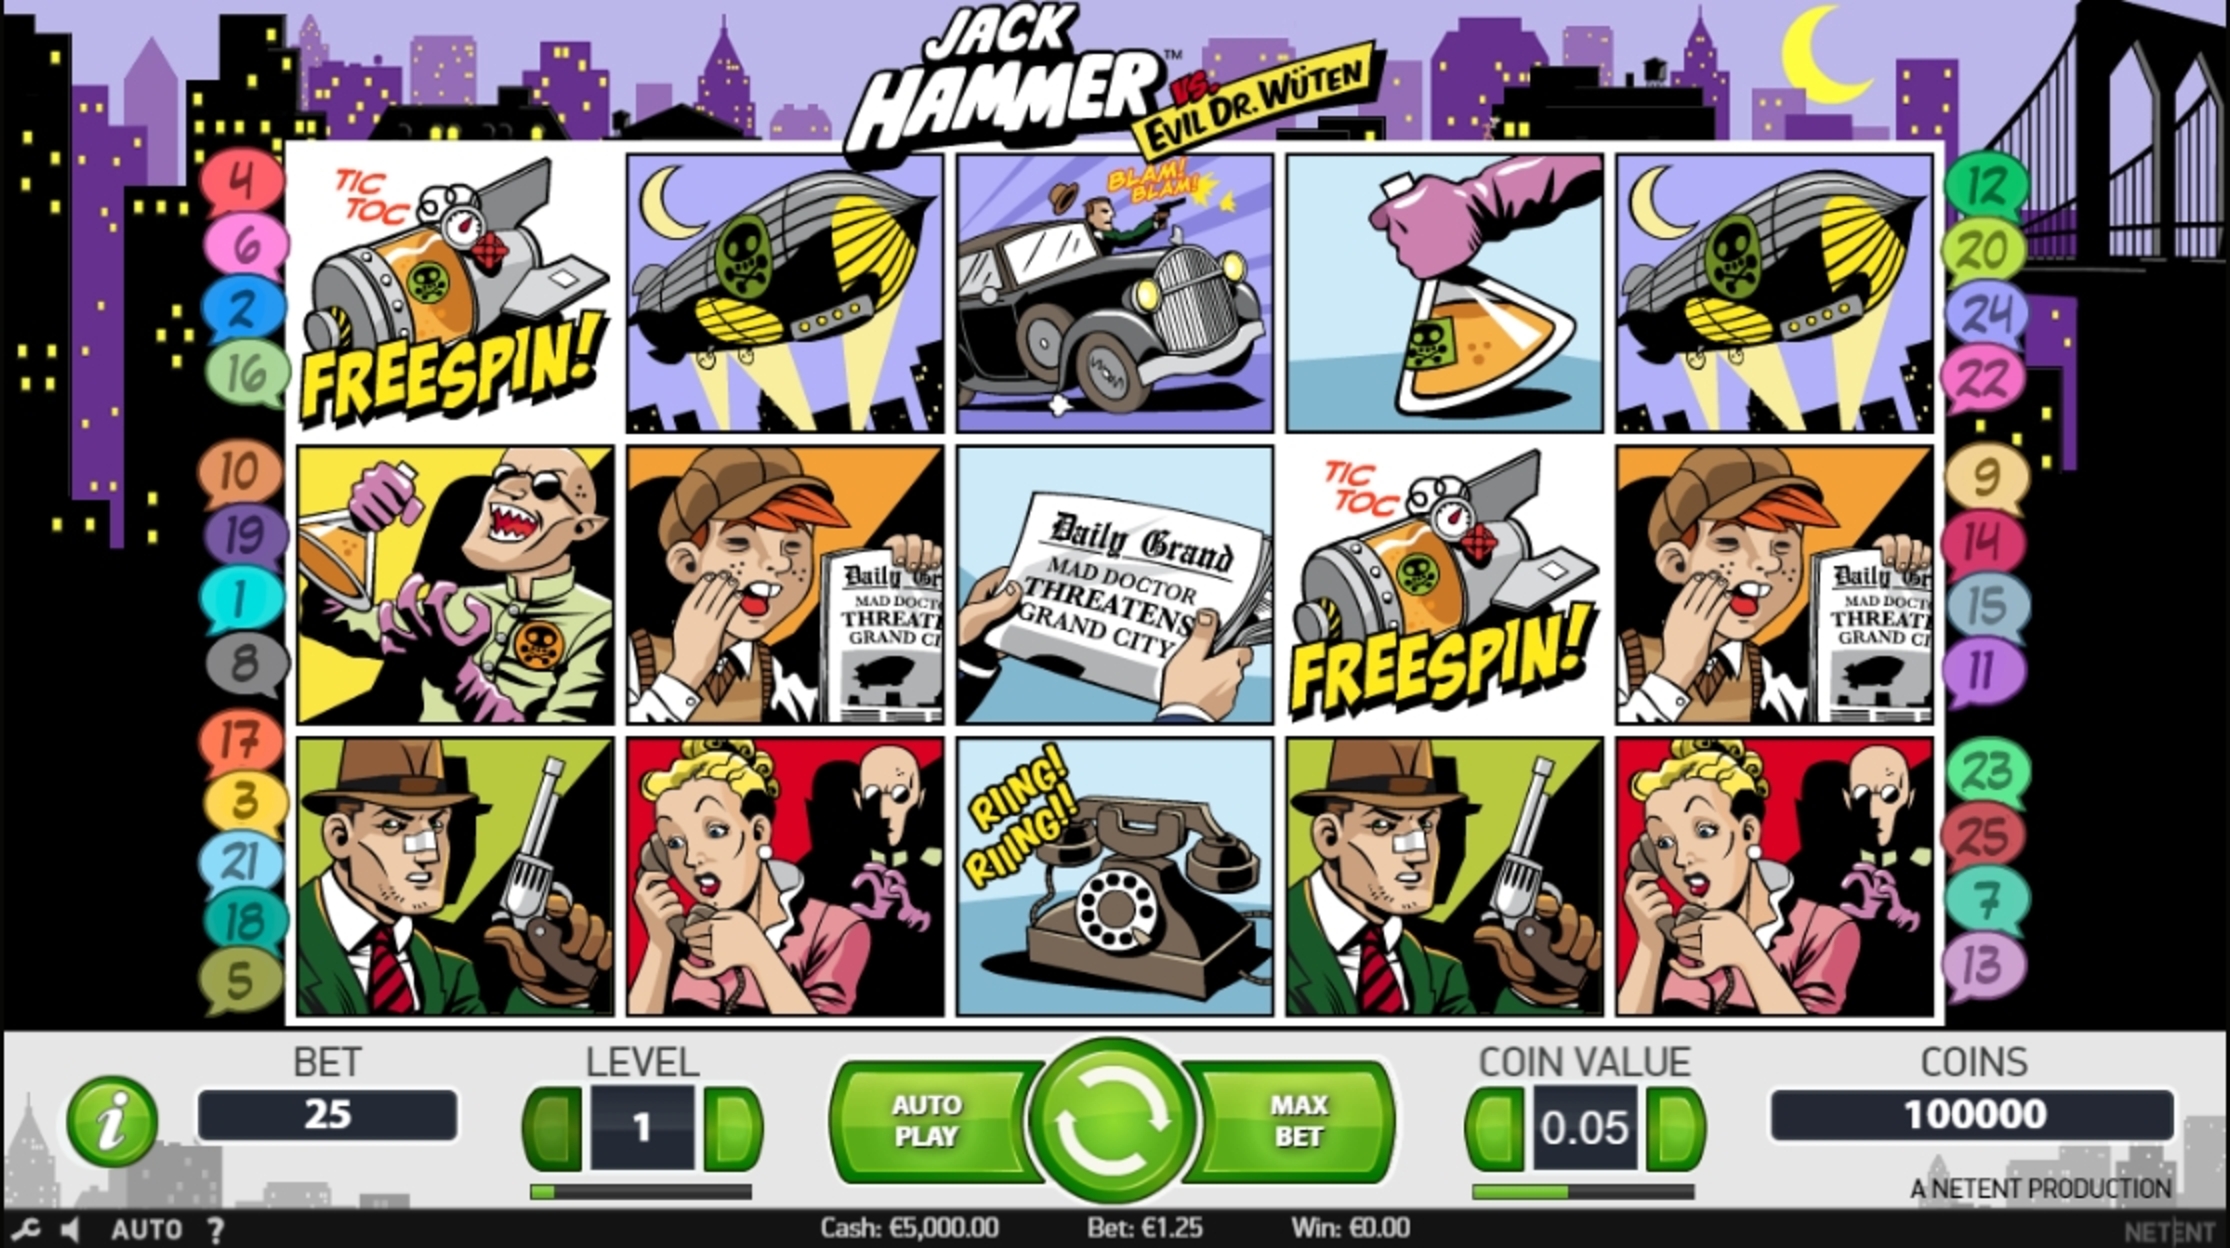 Reels in Jack Hammer Slot Game by NetEnt